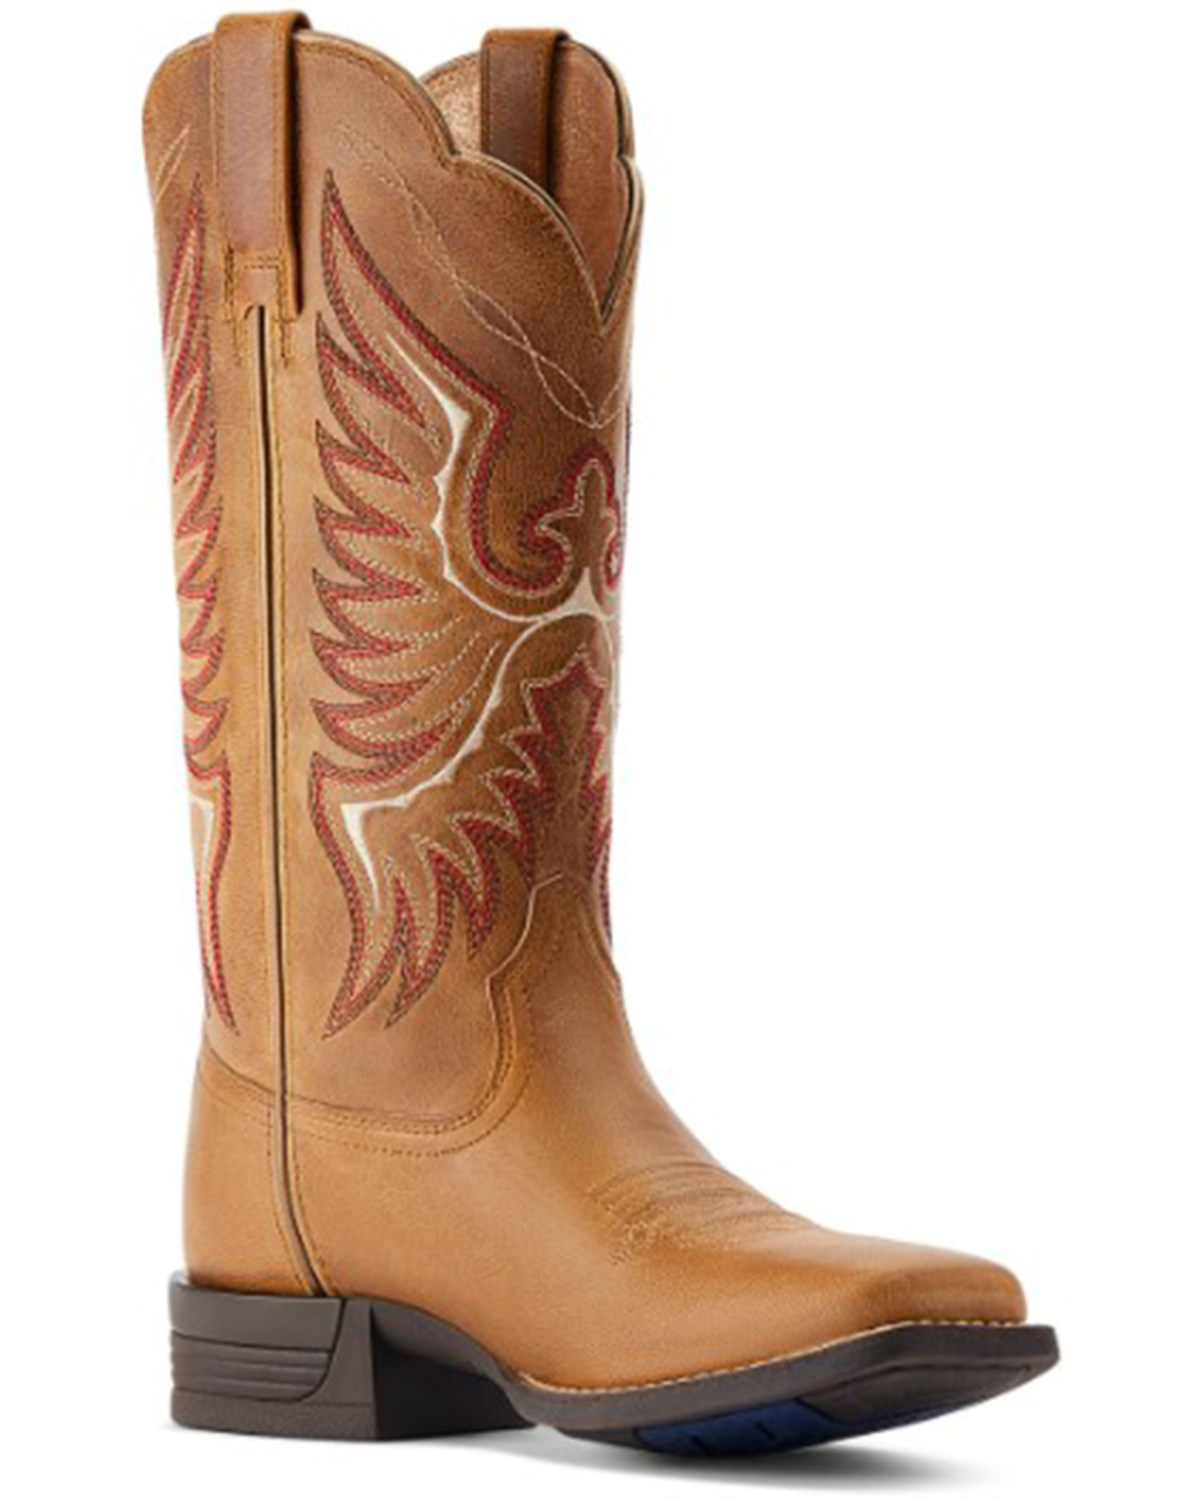 Ariat Women's Rockdale Western Performance Boots - Broad Square Toe